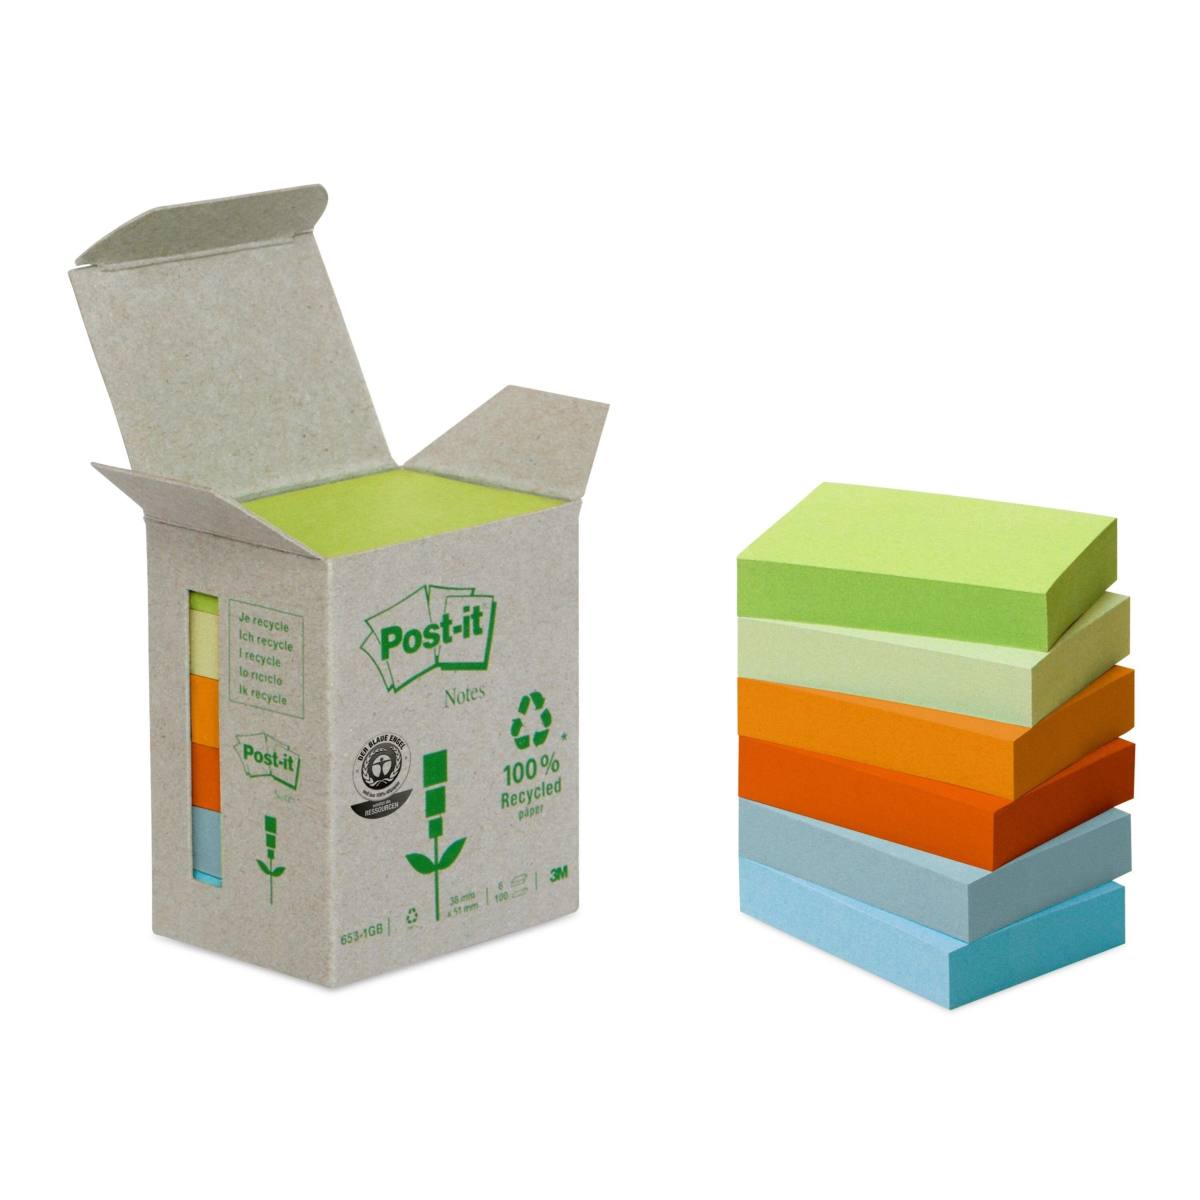 3M Post-it Recycling Notes 653-1GB, 51 mm x 38 mm, various colours, 6 pads of 100 sheets each